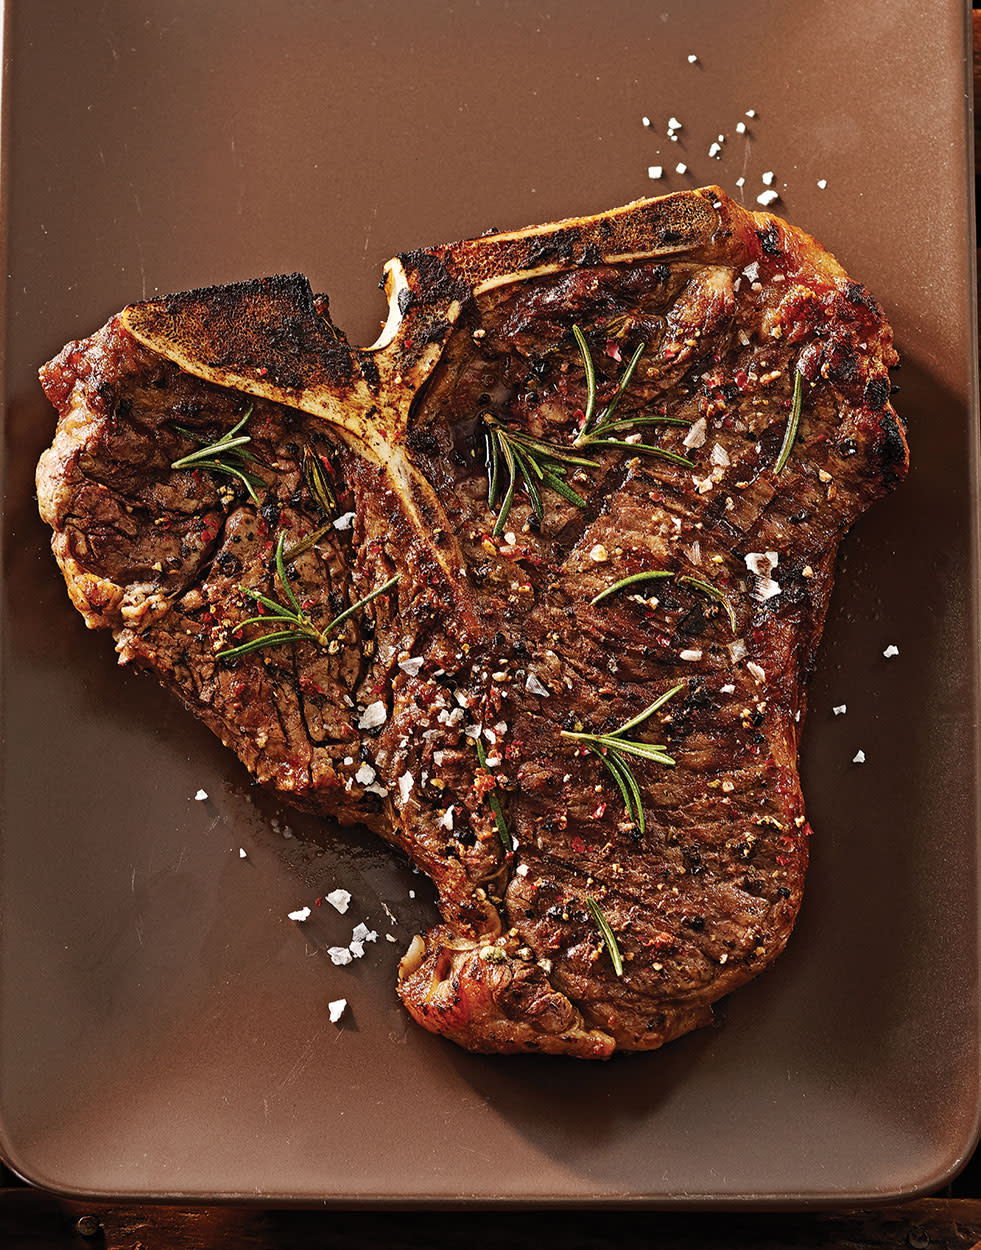 How to Grill the Perfect Steak